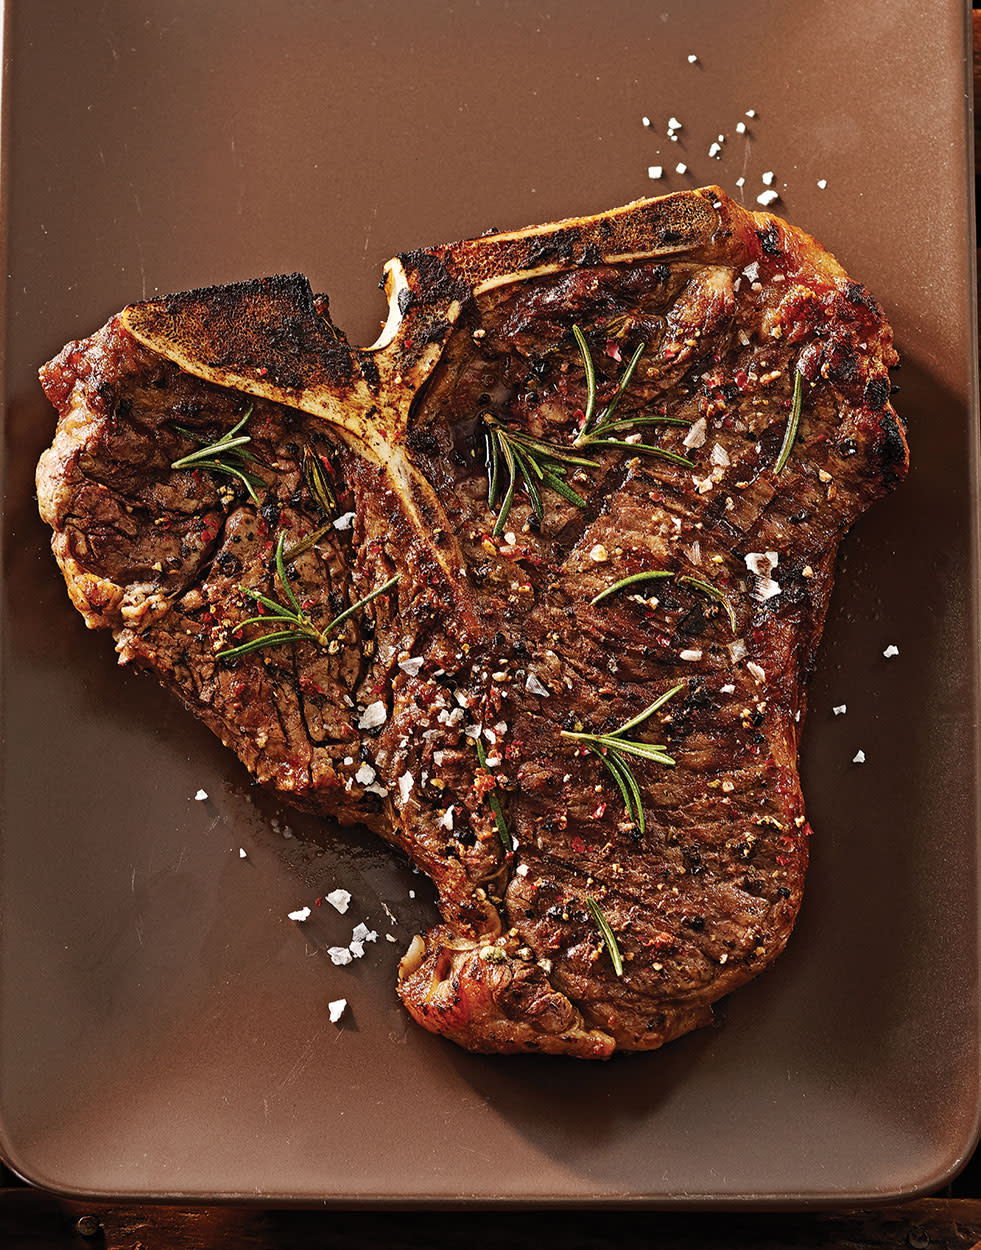 How to Grill the Perfect Steak